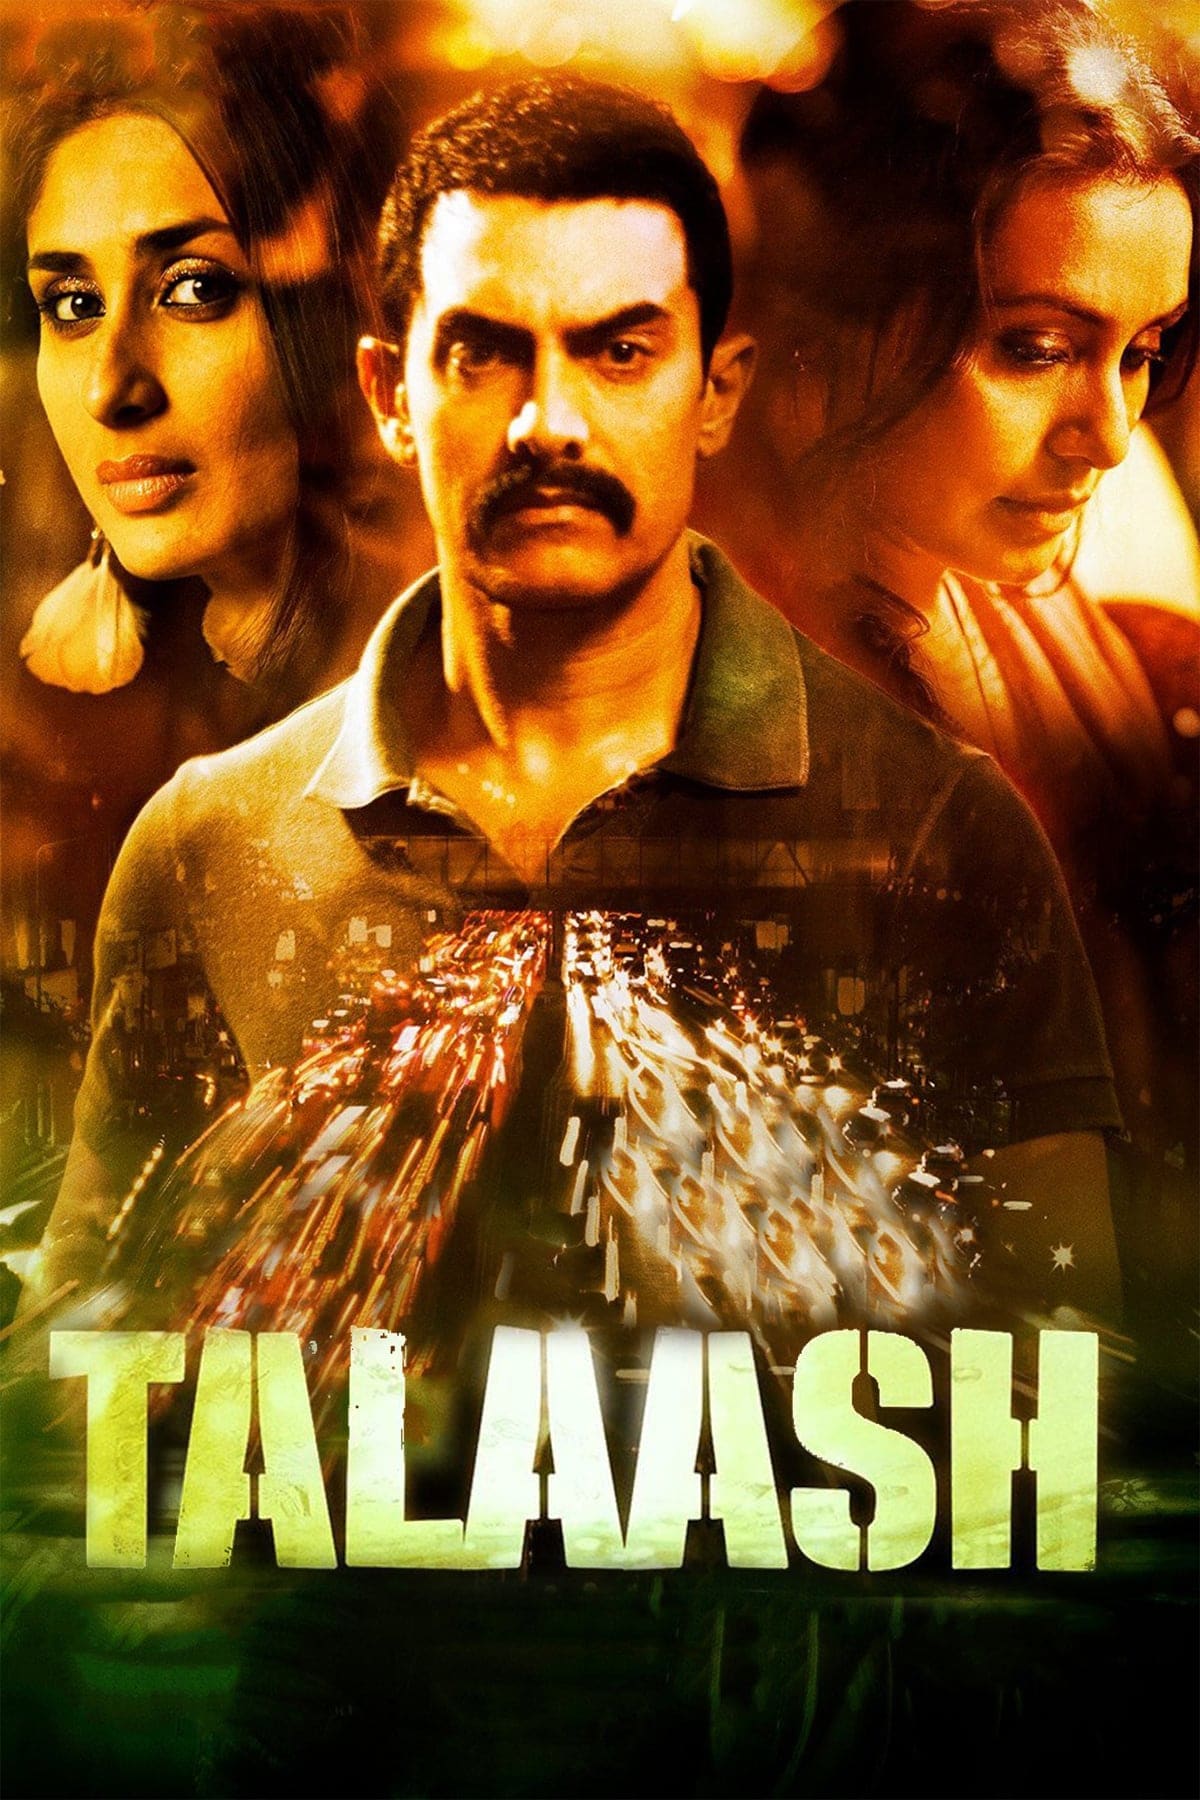 Poster for the movie "Talaash"